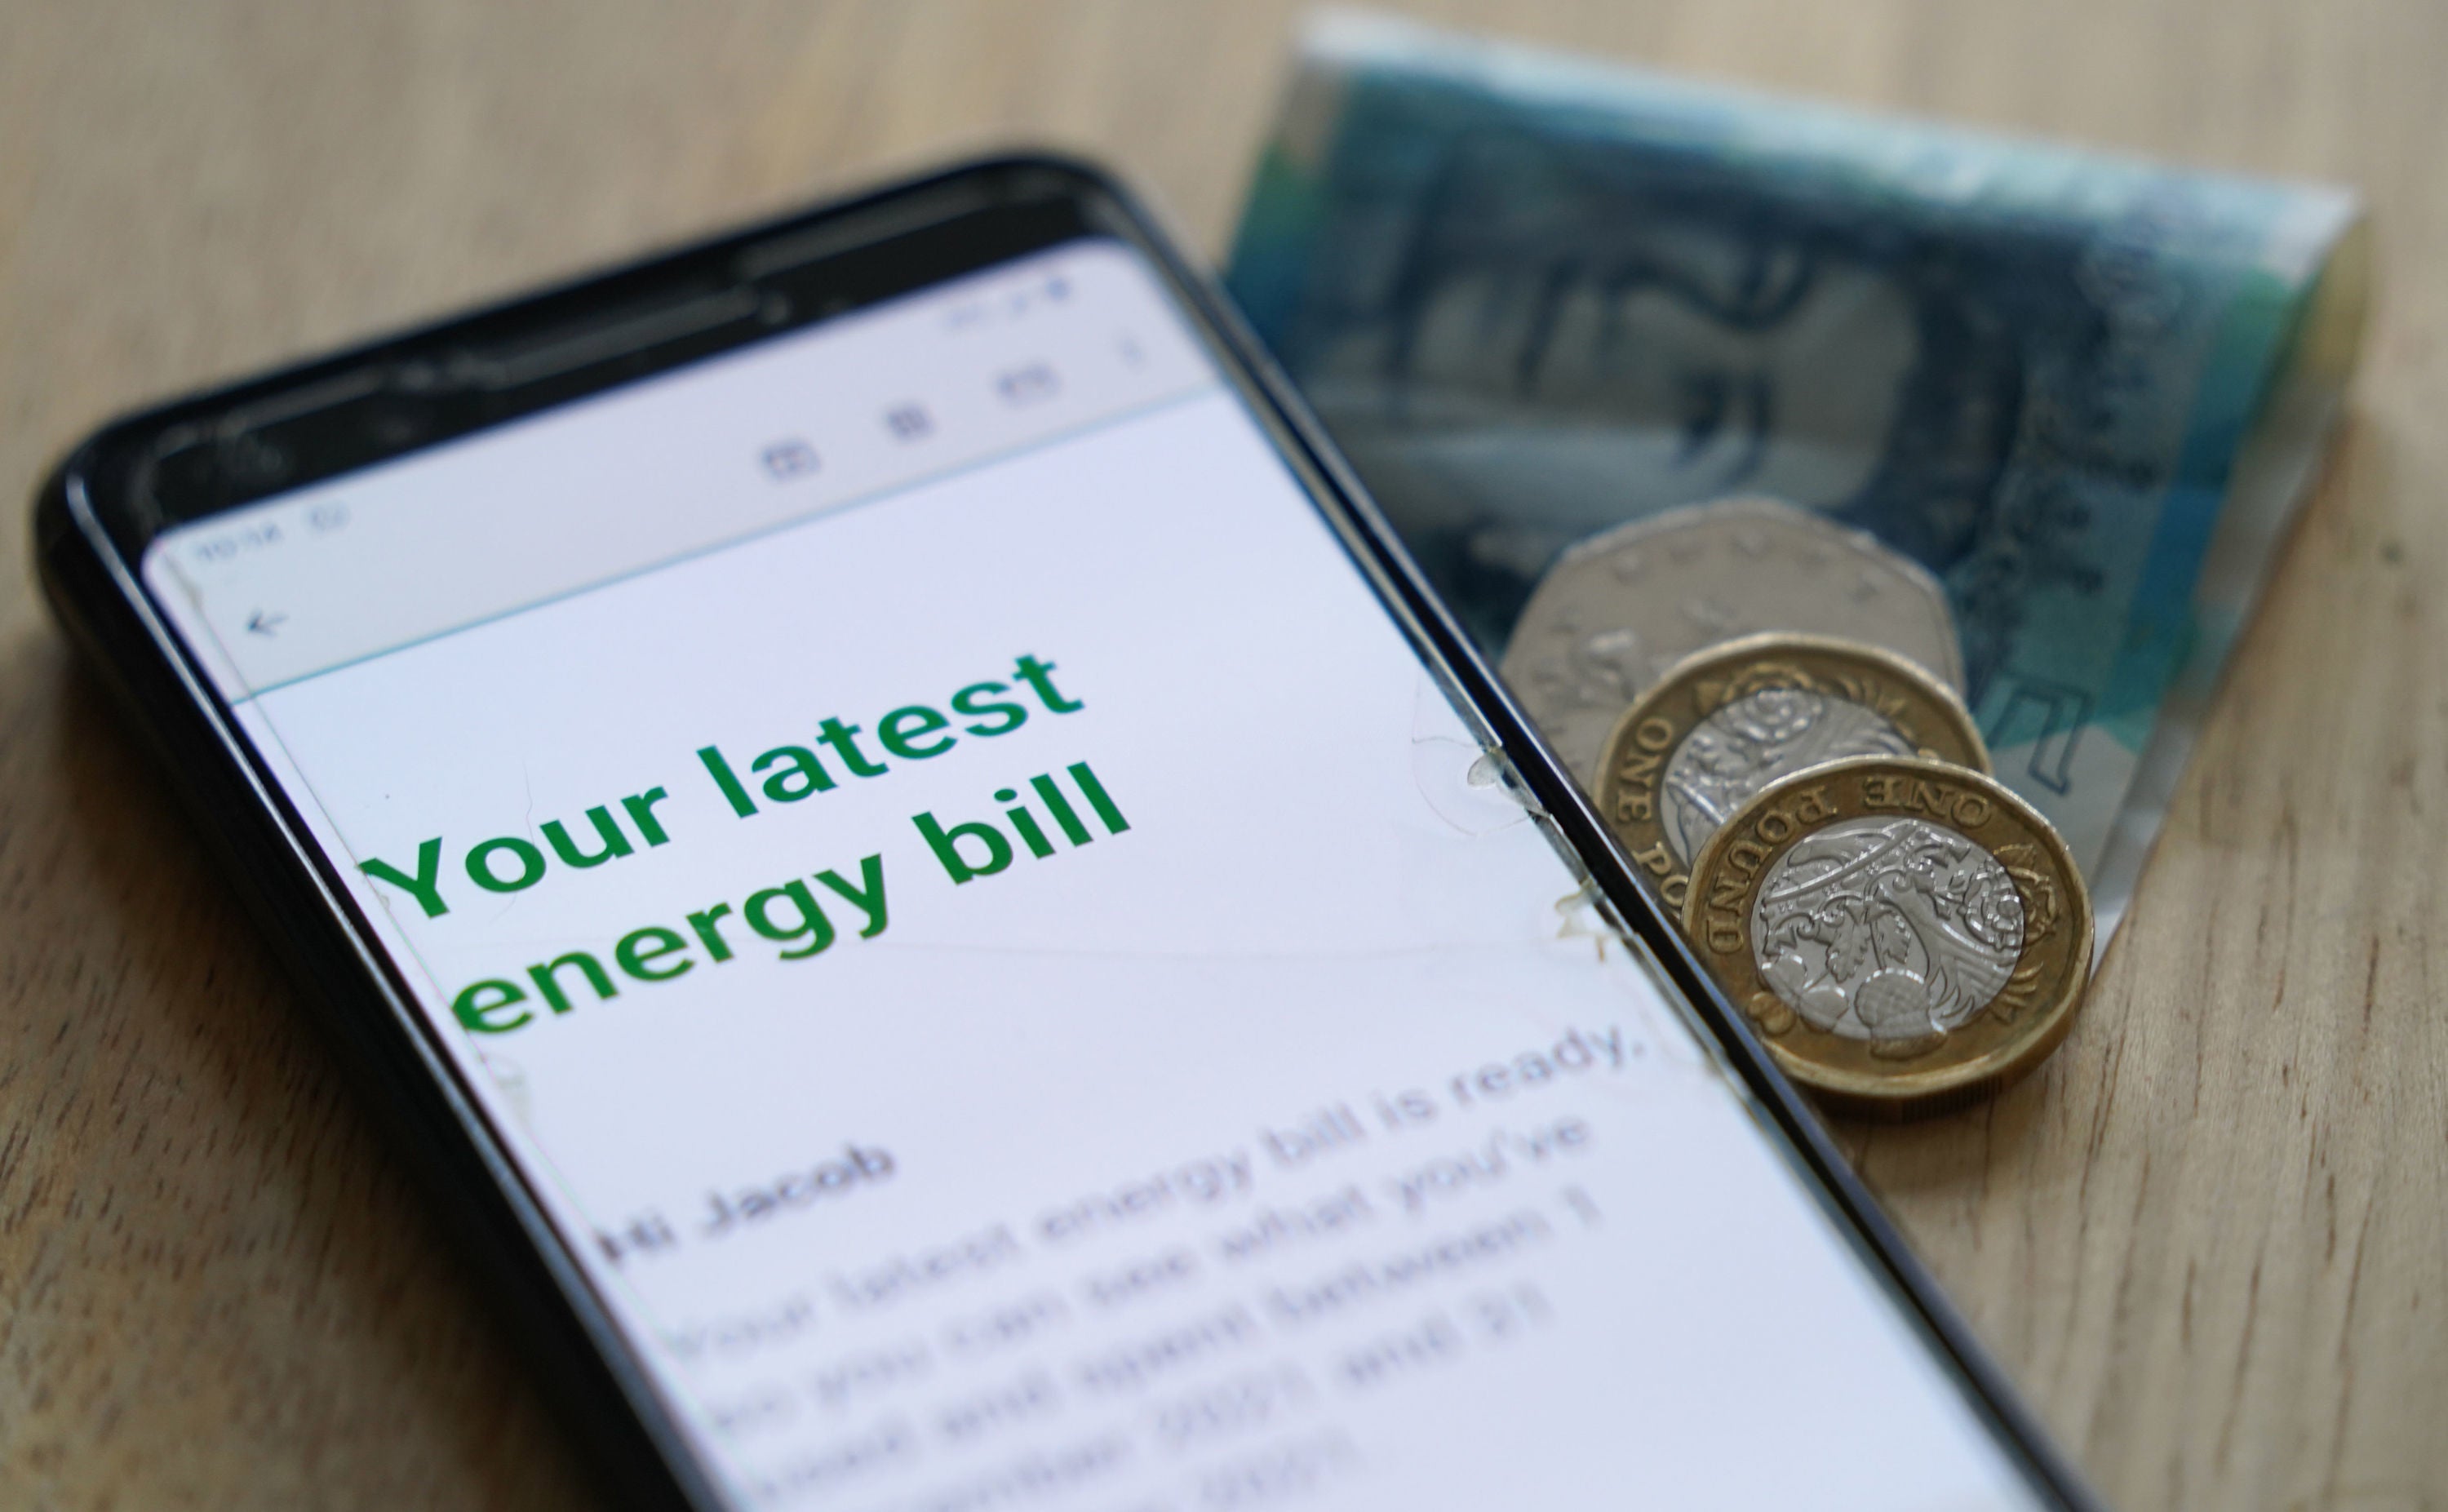 Customers are changing the way they consume energy with usage like powering electric cars meaning they can switch the time of day and take advantage of new tariffs - but Ofgem fears this could eventually undermine the current energy price cap system